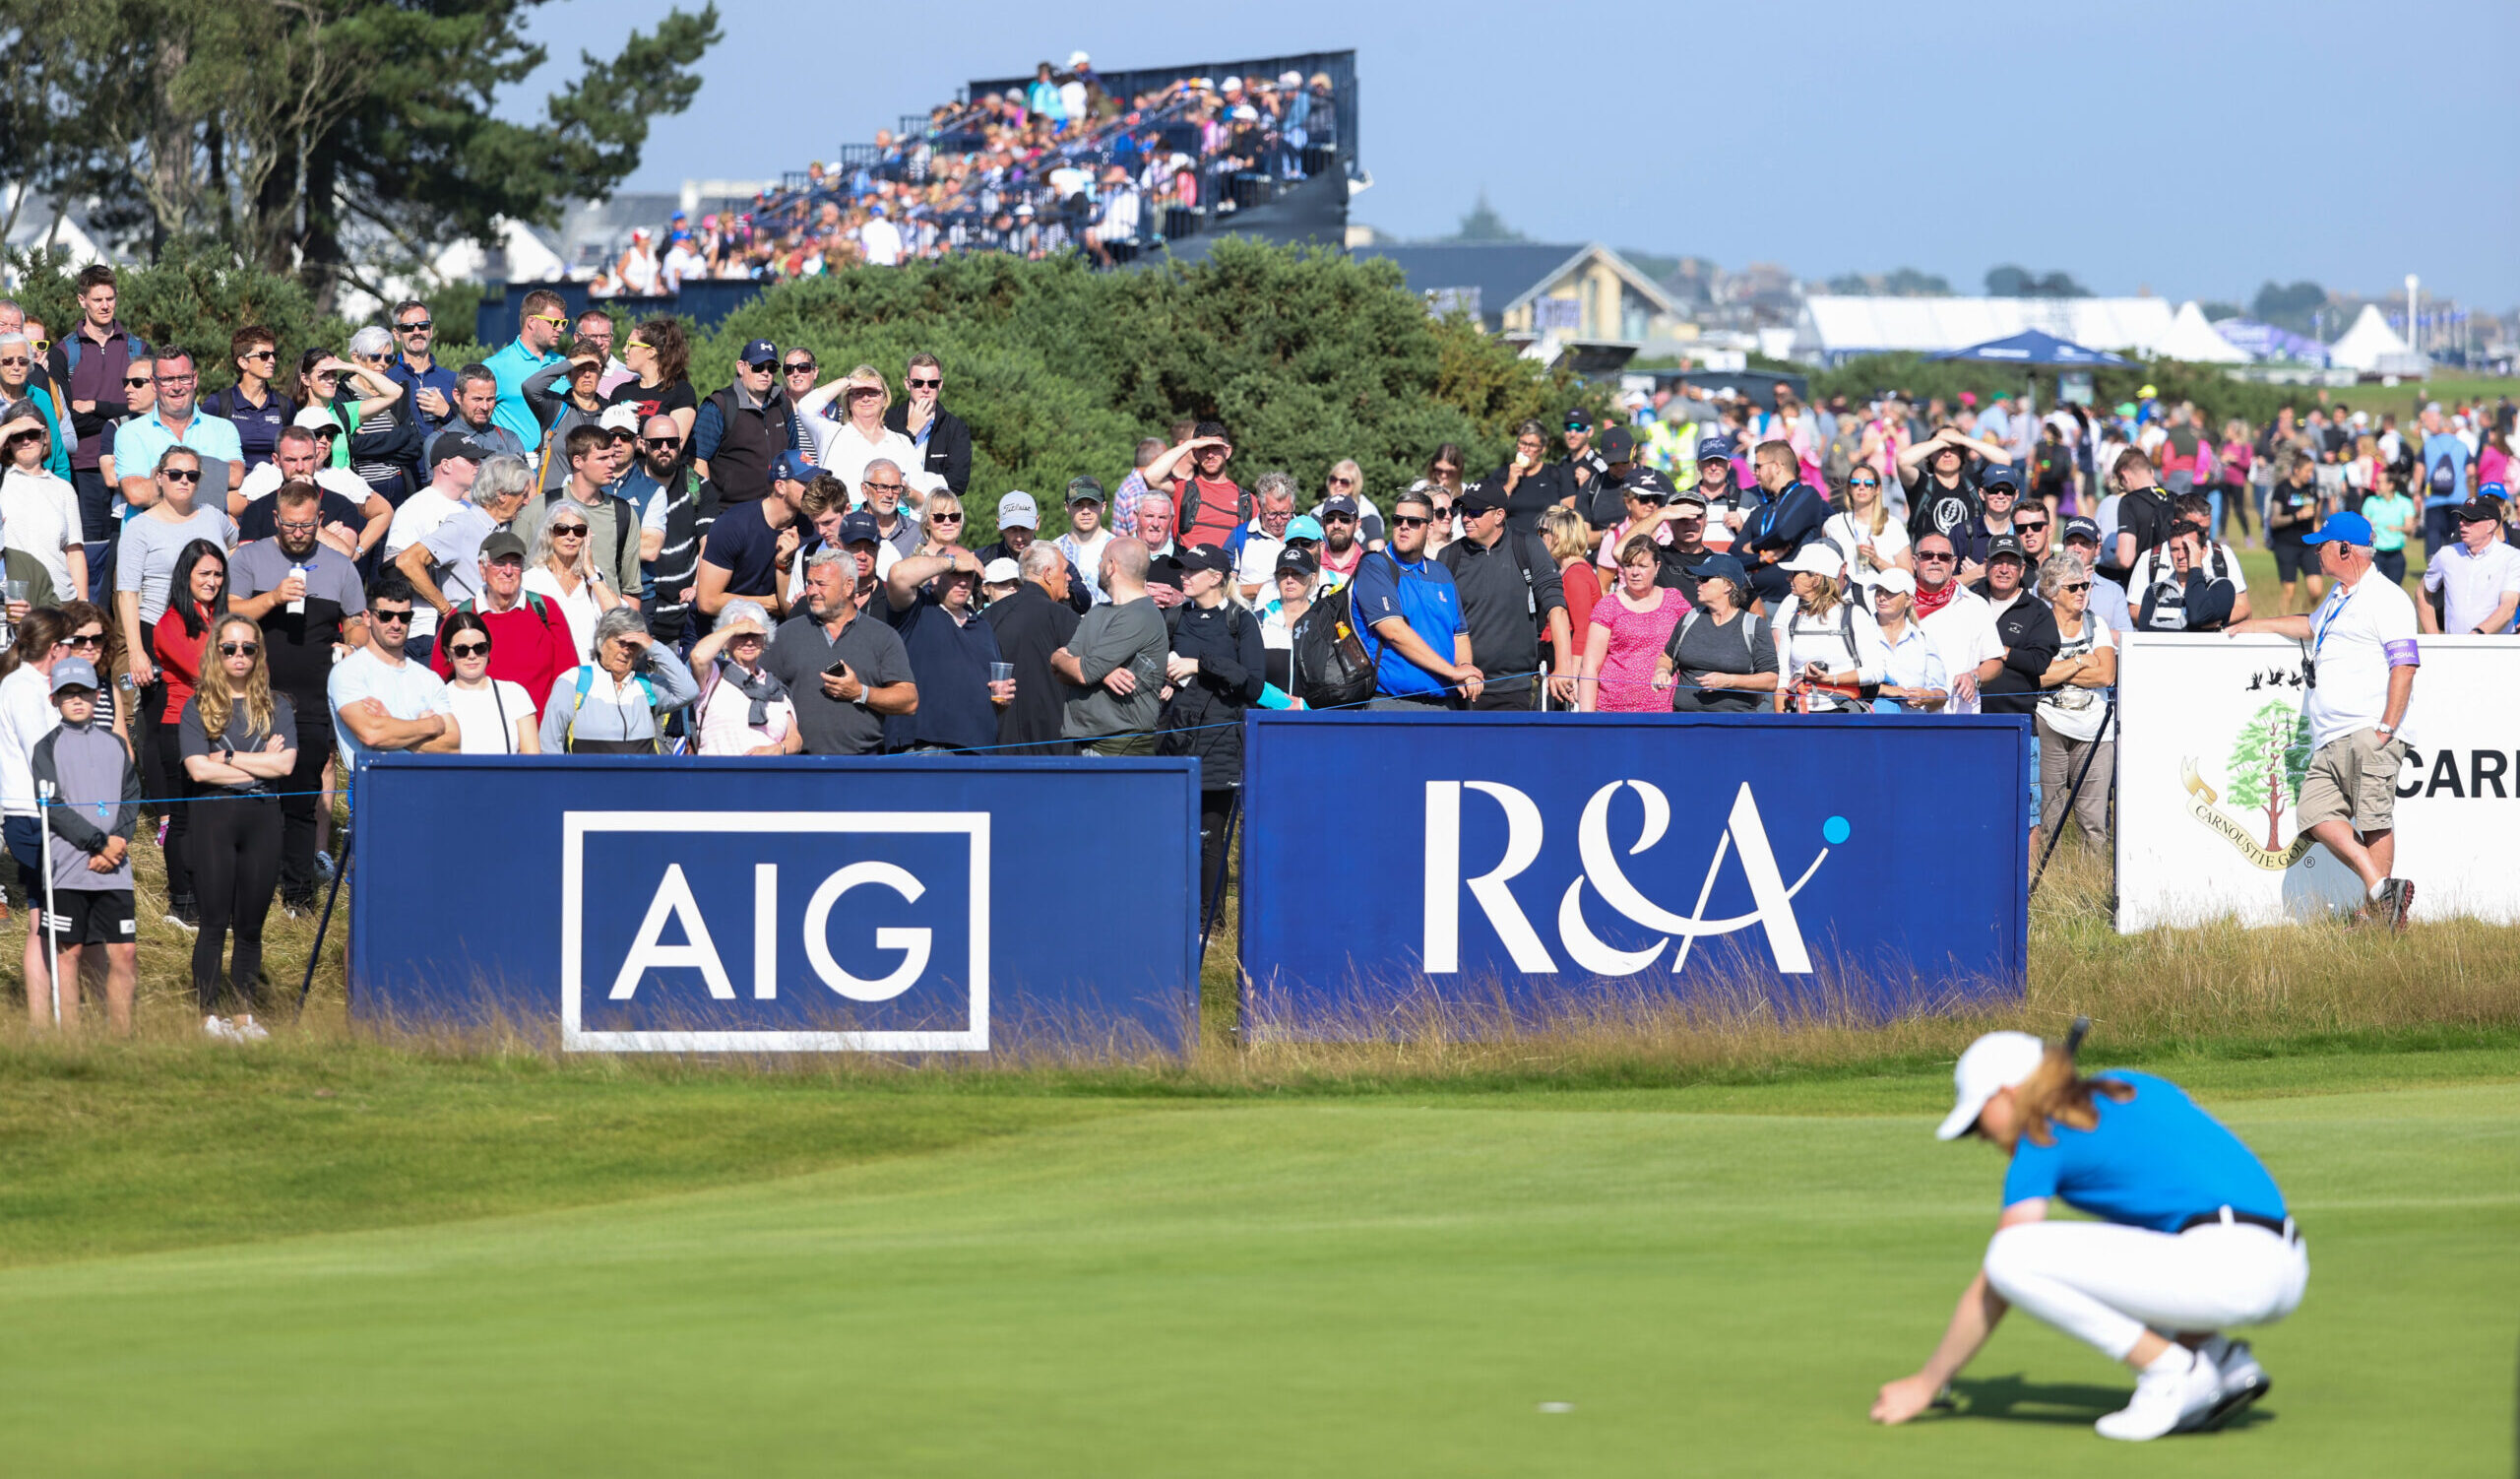 Crowds watch on as Louise Duncan of Scotland lines up a putt on the seventh green during Day Four of the AIG Women's Open at Carnoustie Golf Links. (Photo by Warren Little/R&A/R&A via Getty Images)